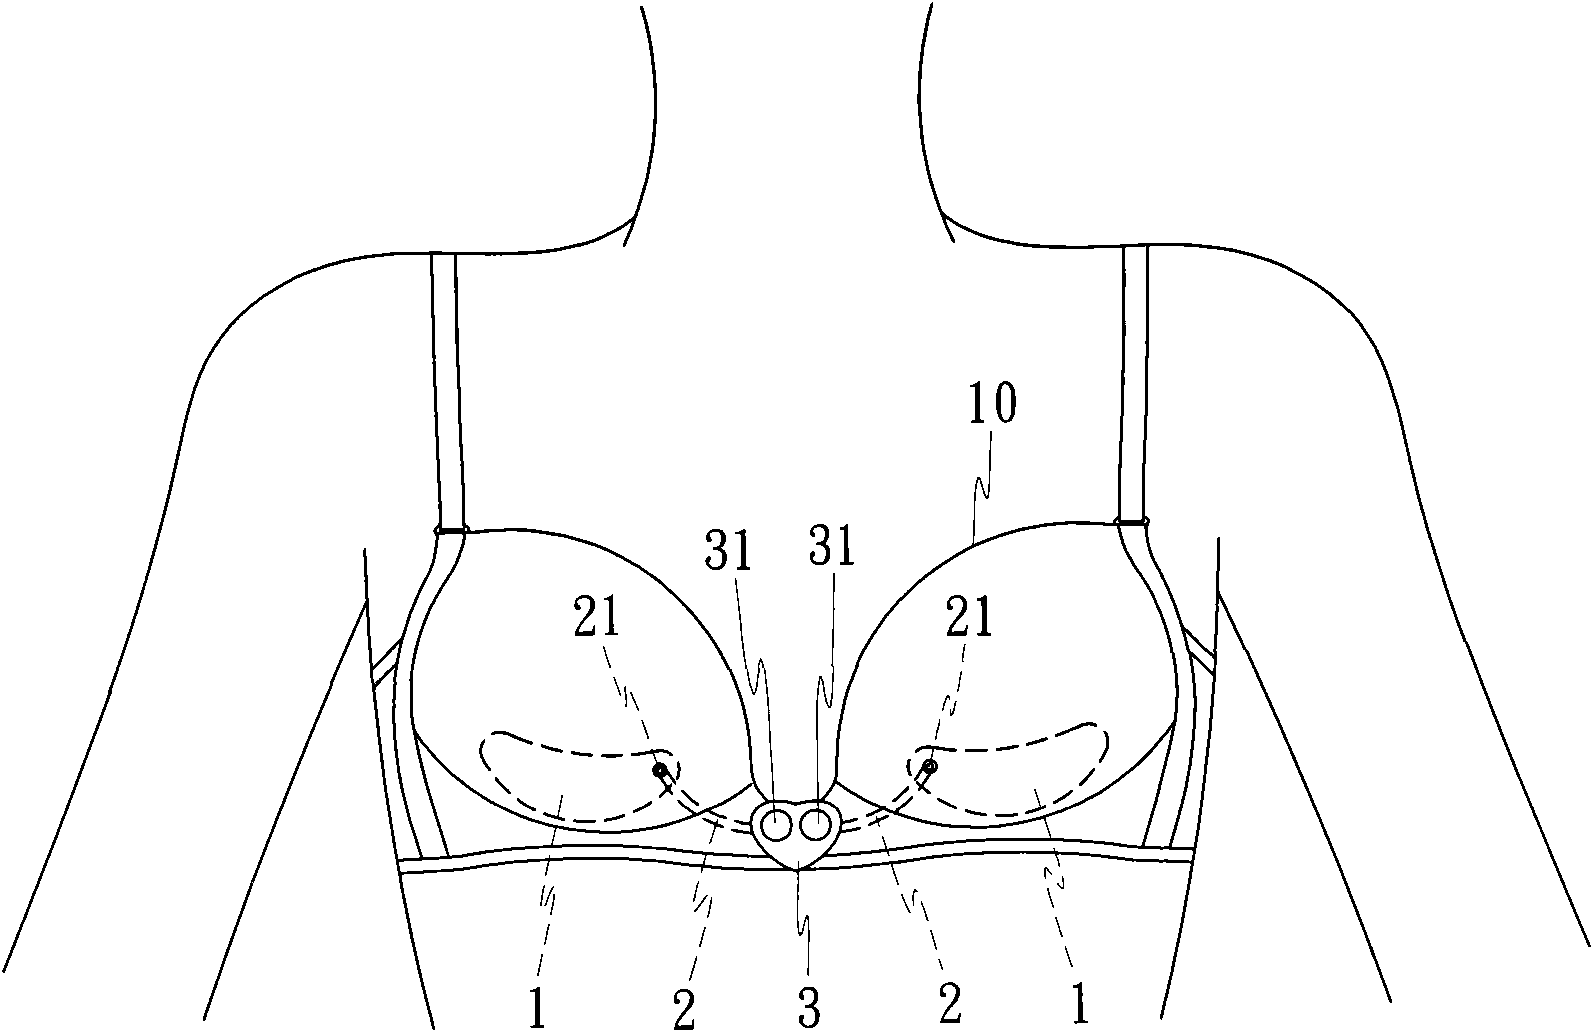 Massage bra pads with function of micro-current stimulation